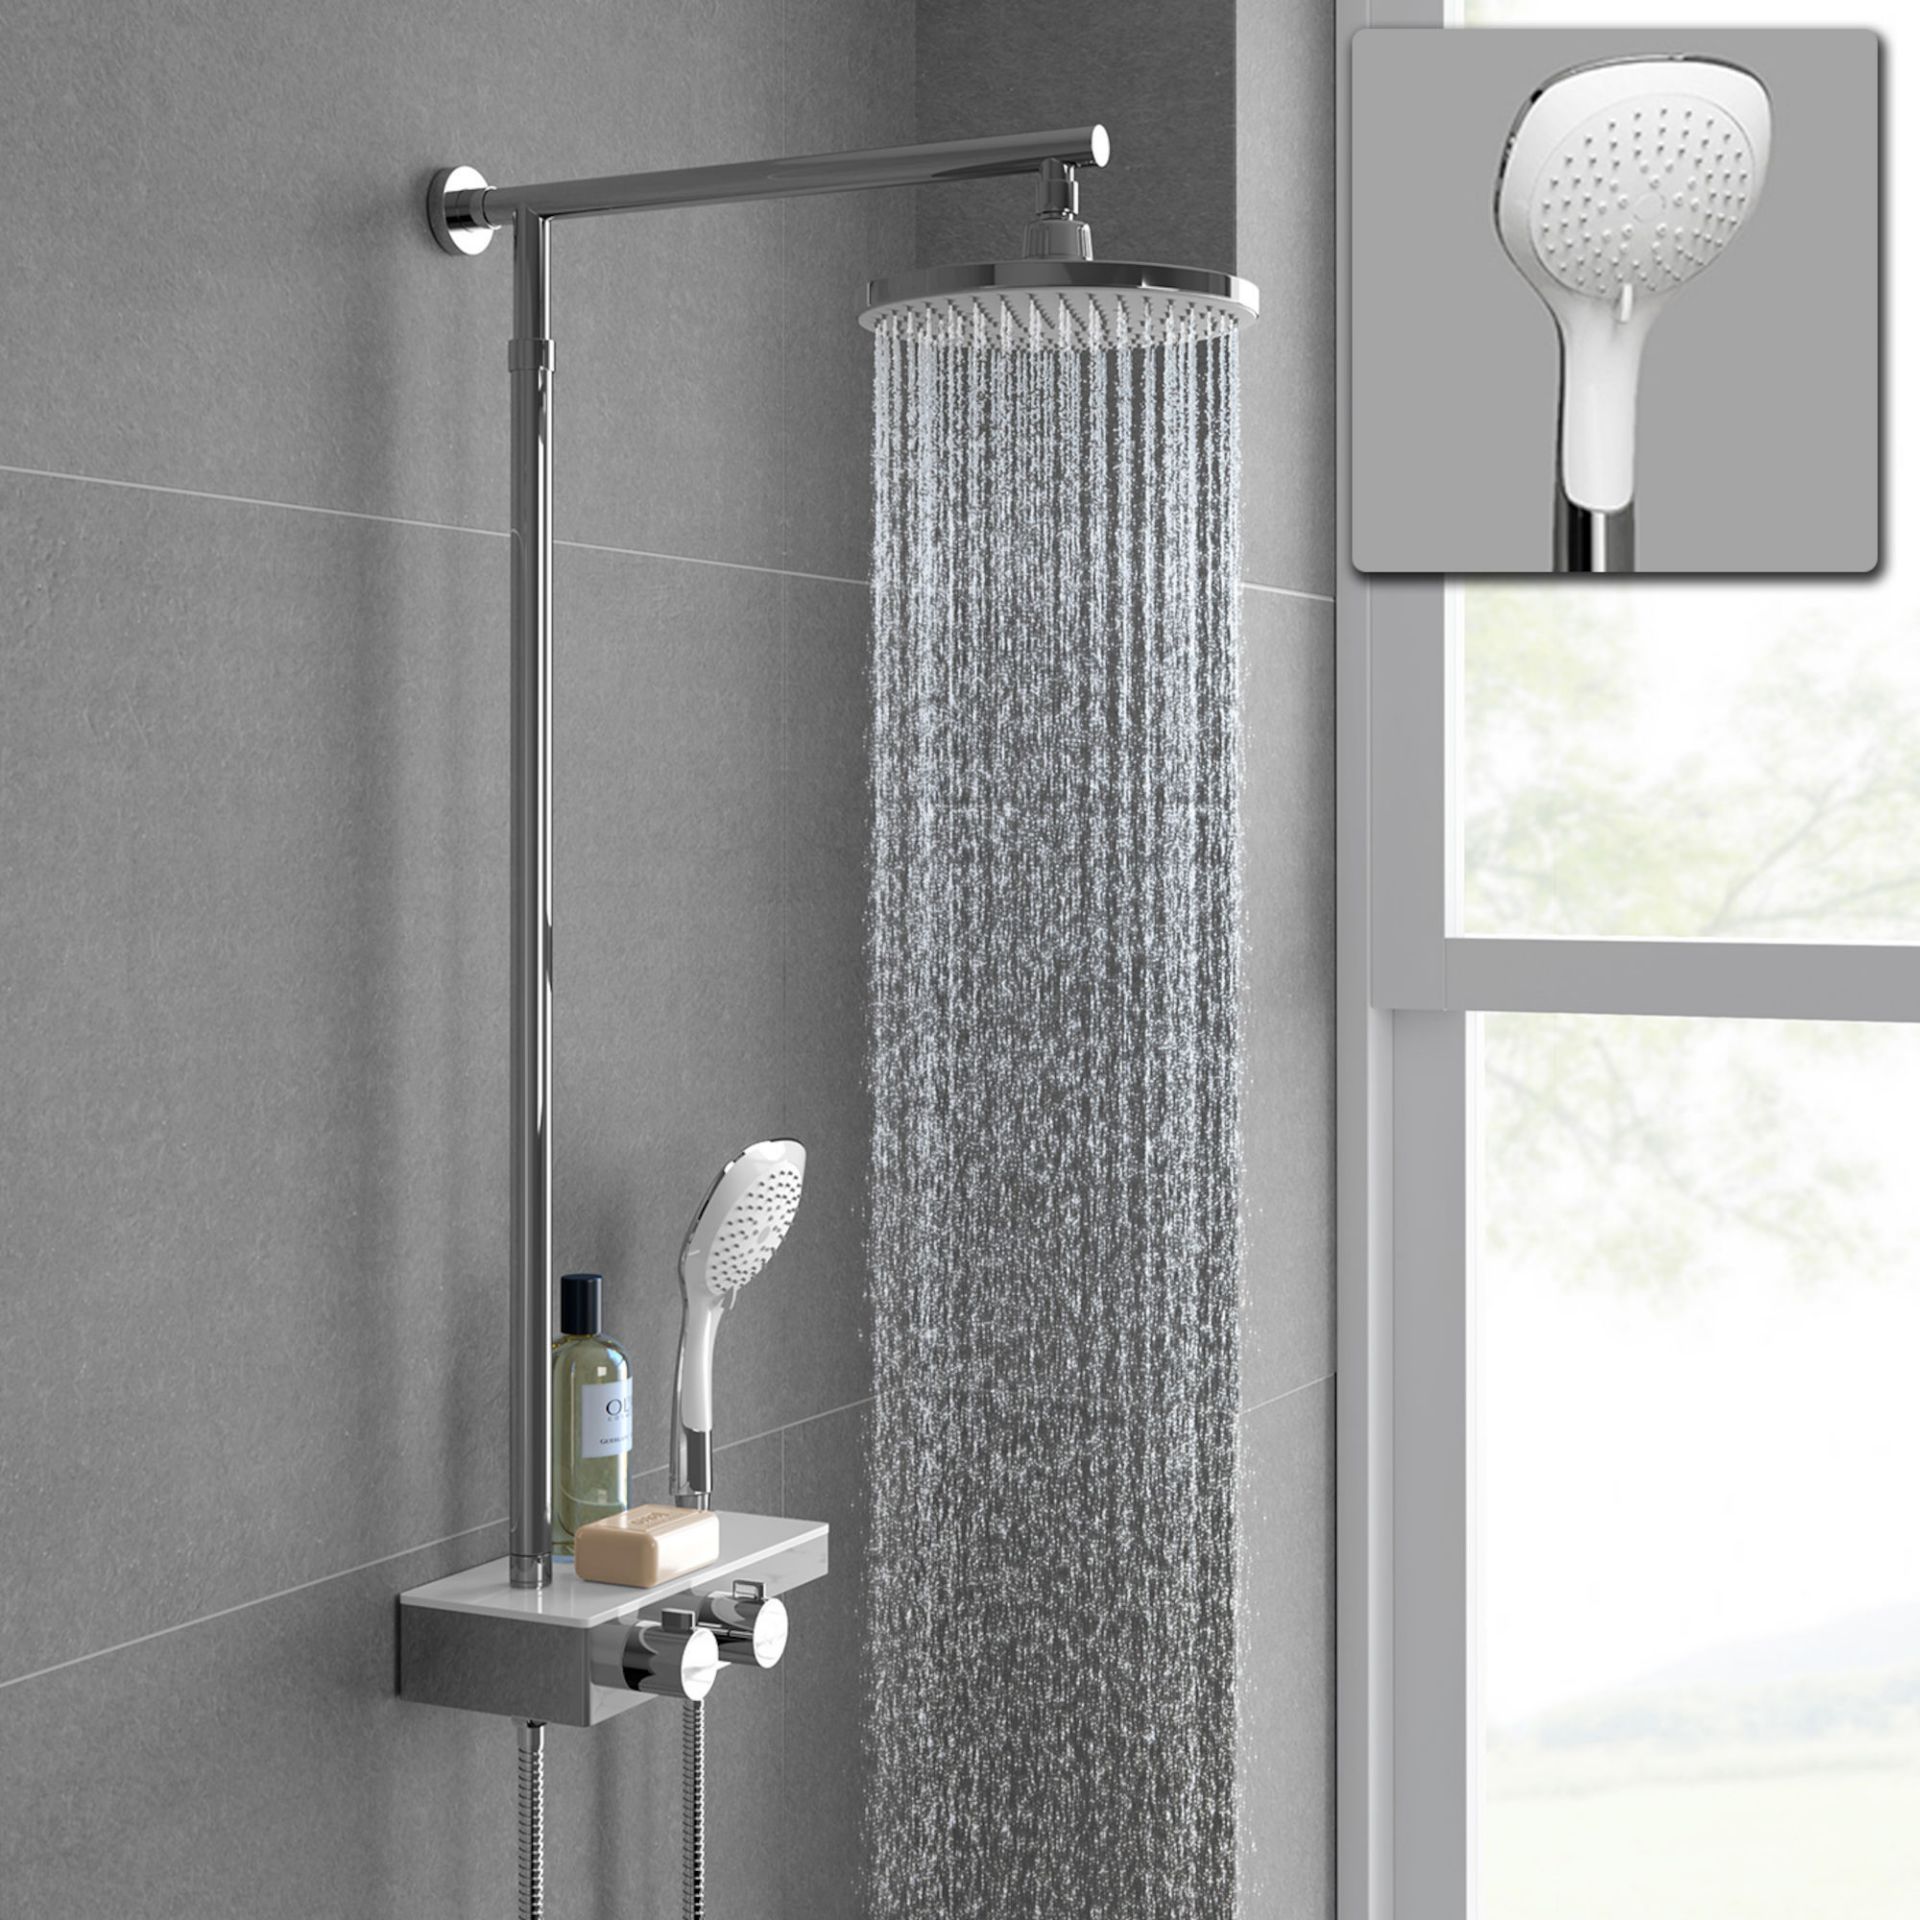 (MW41) Round Exposed Thermostatic Mixer Shower Kit Medium Head & Shelf. RRP £349.99. Cool to touch - Image 5 of 6